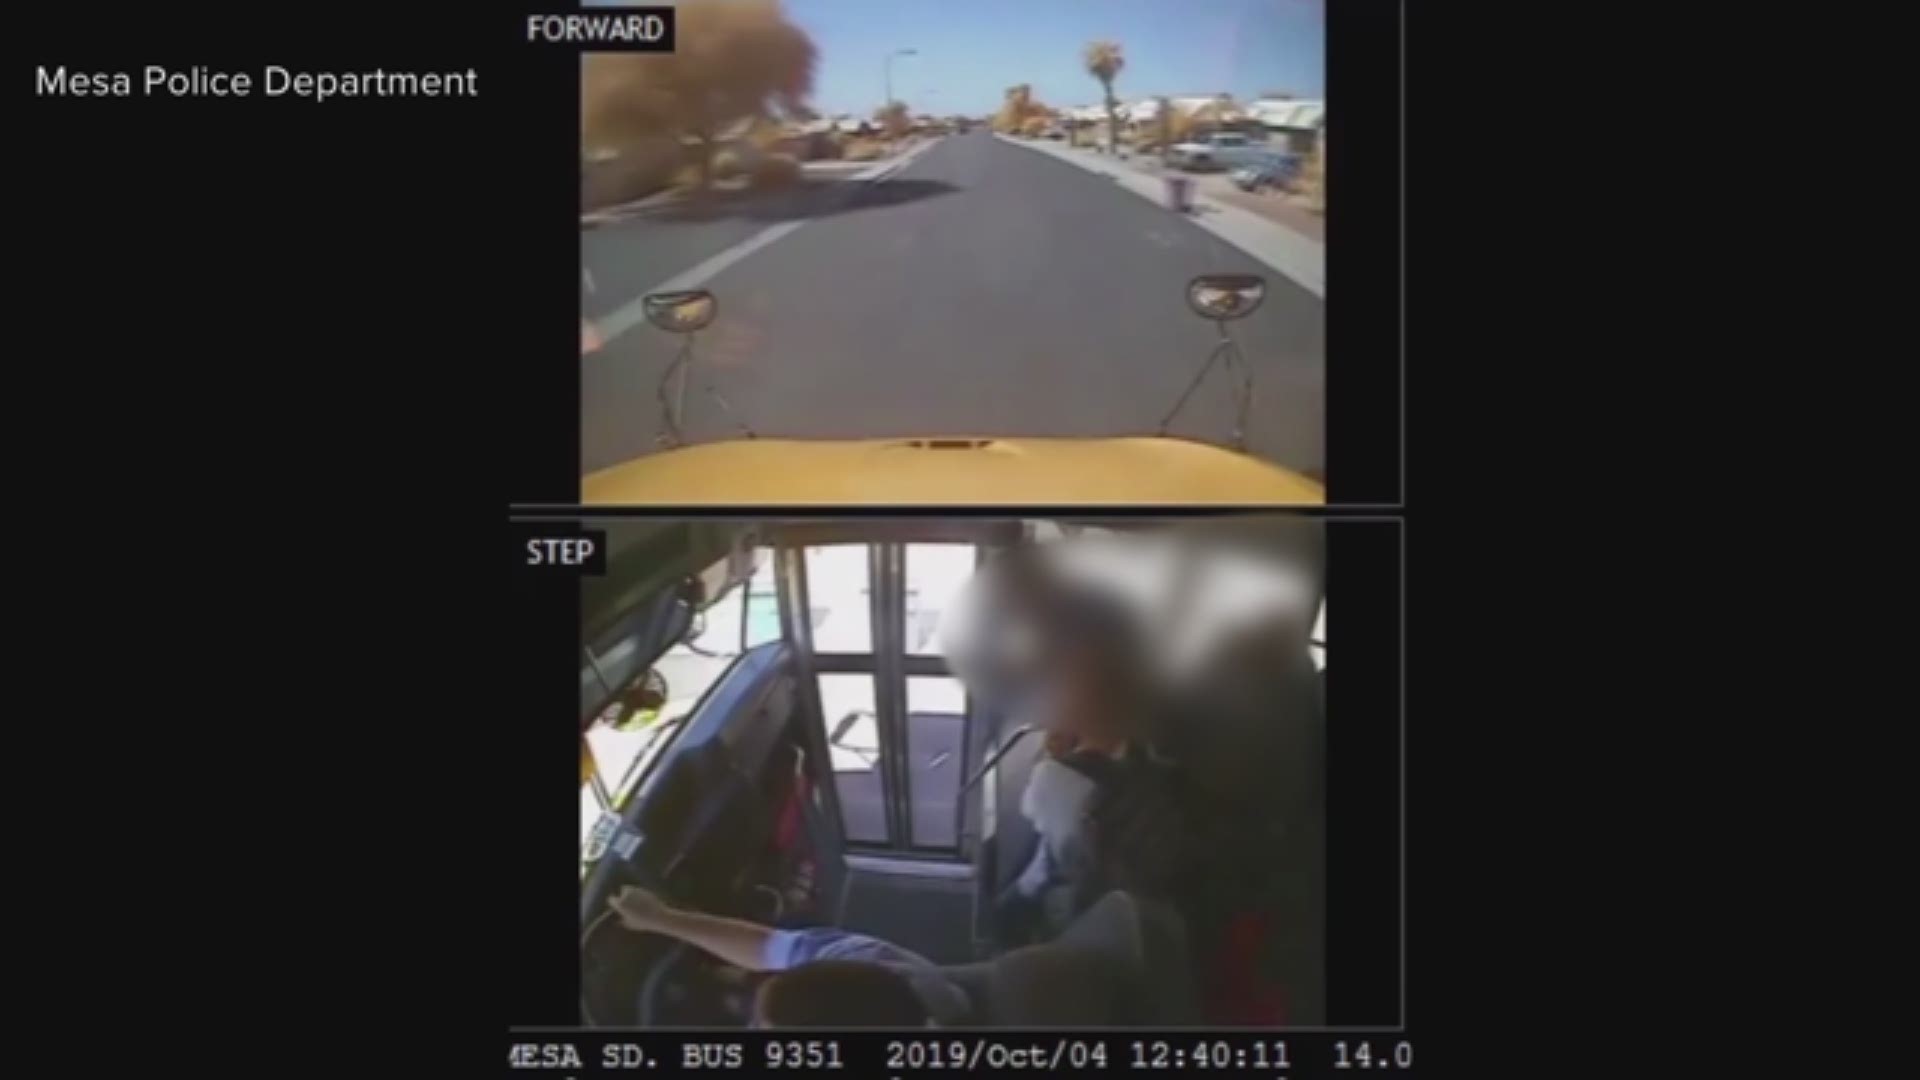 Surveillance video shows a Mesa bus driver yelling obscenities at students and slamming on the brakes out of anger, throwing an 11-year-old into the windshield.